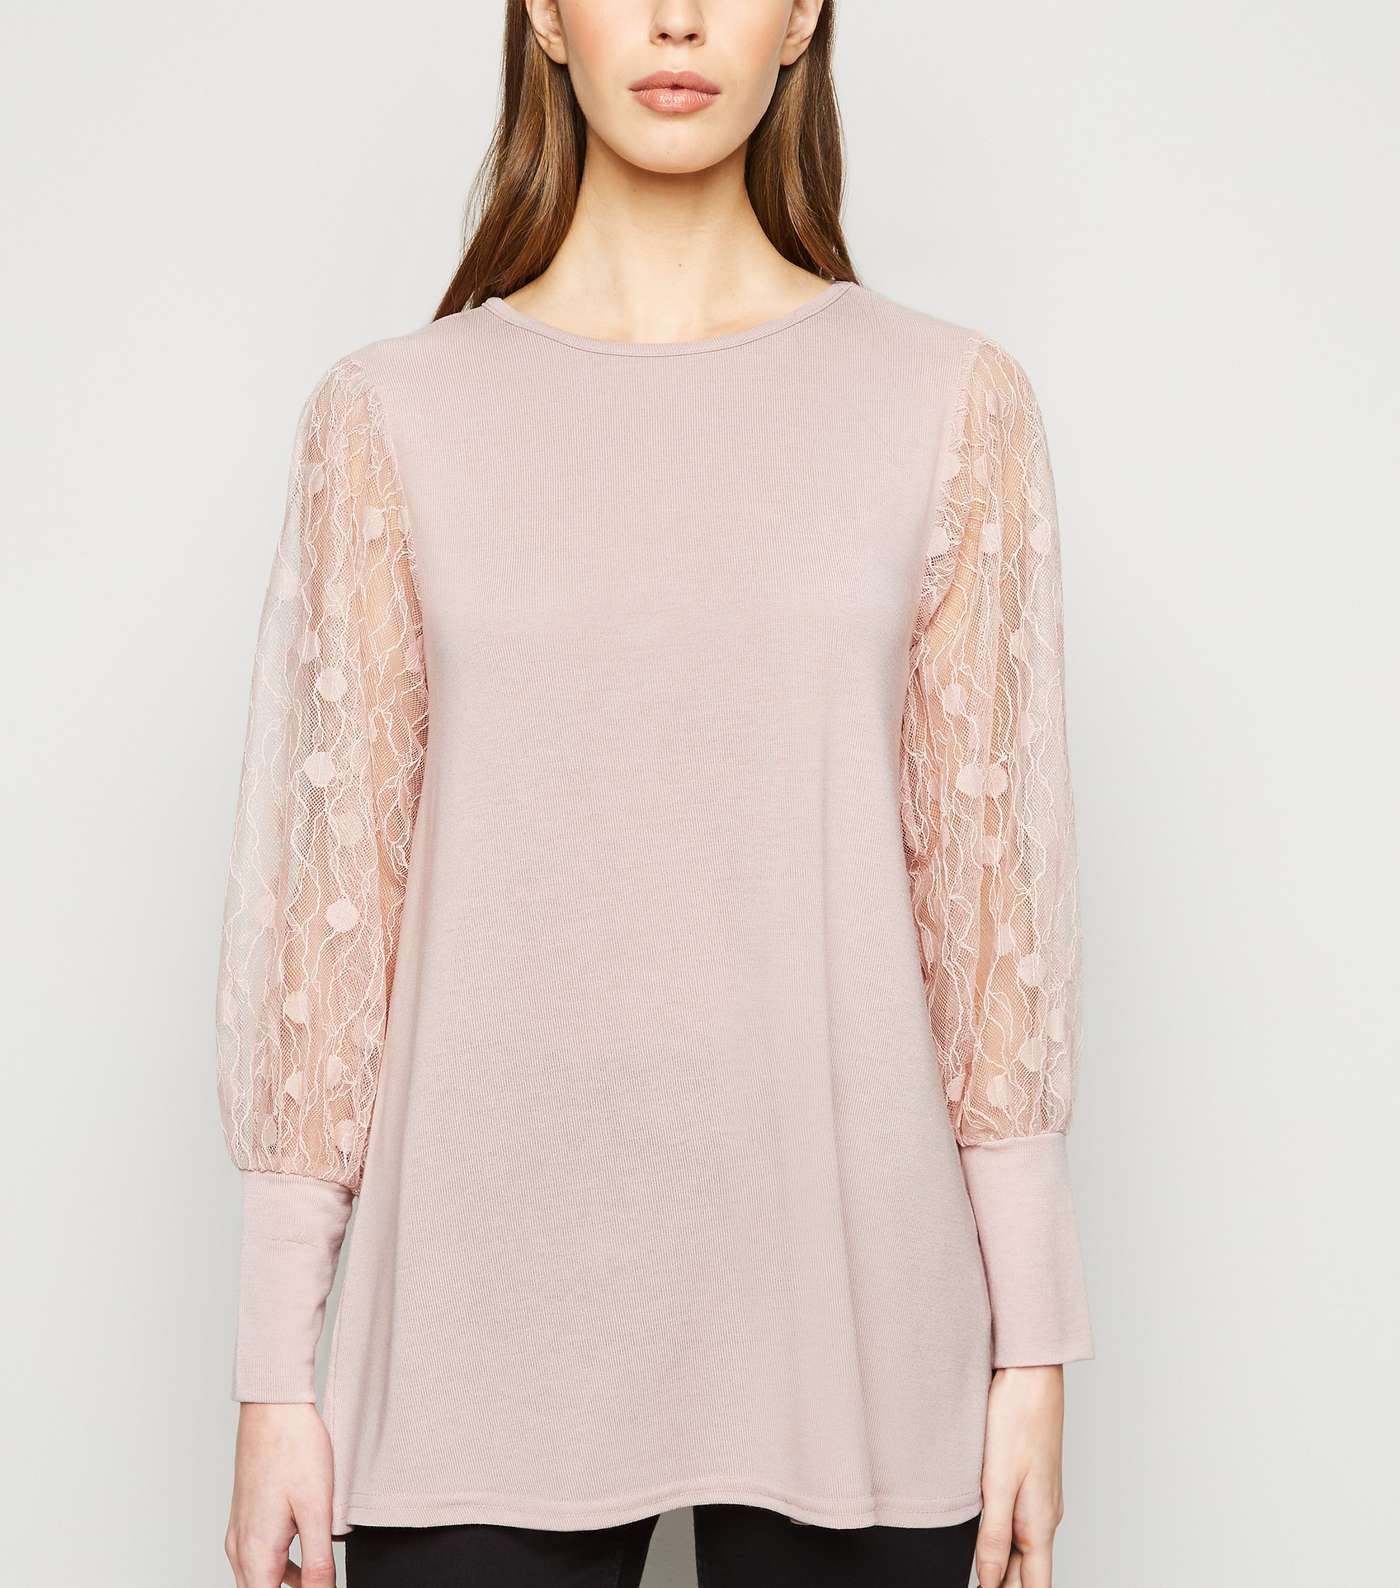 Blue Vanilla Pink Lace Sleeve Top